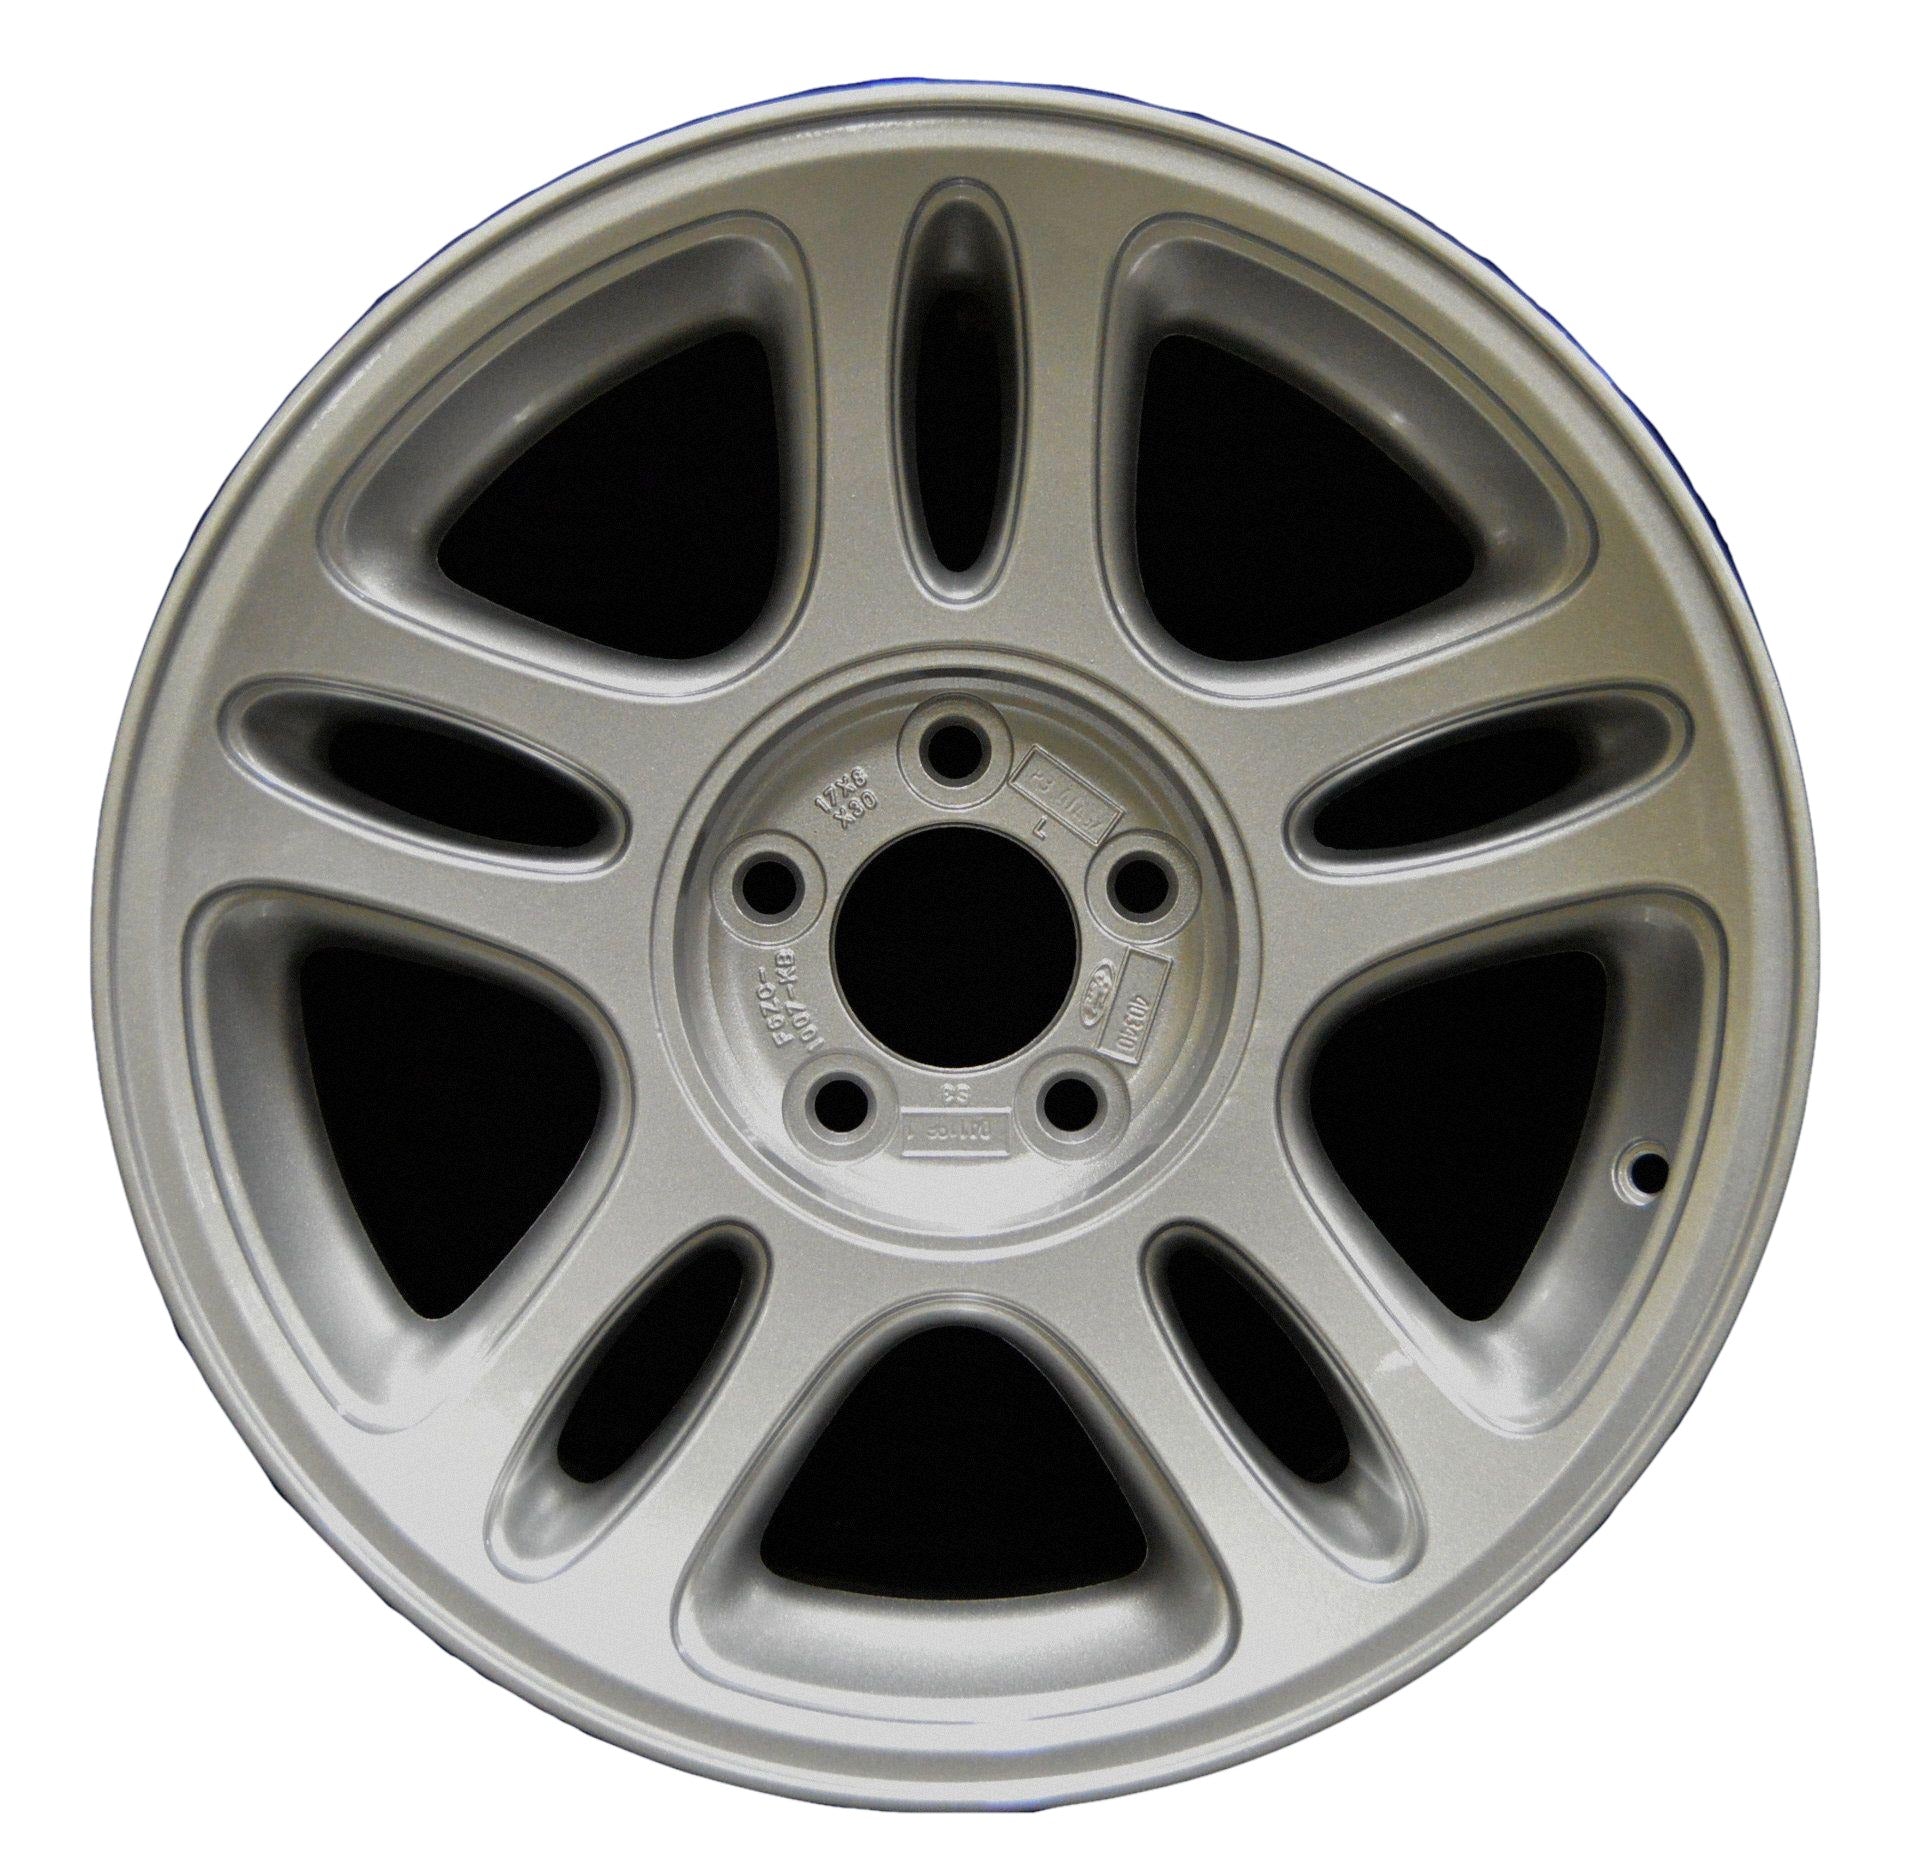 Ford Mustang  1996, 1997, 1998 Factory OEM Car Wheel Size 17x8 Alloy WAO.3174A.PS02.FF